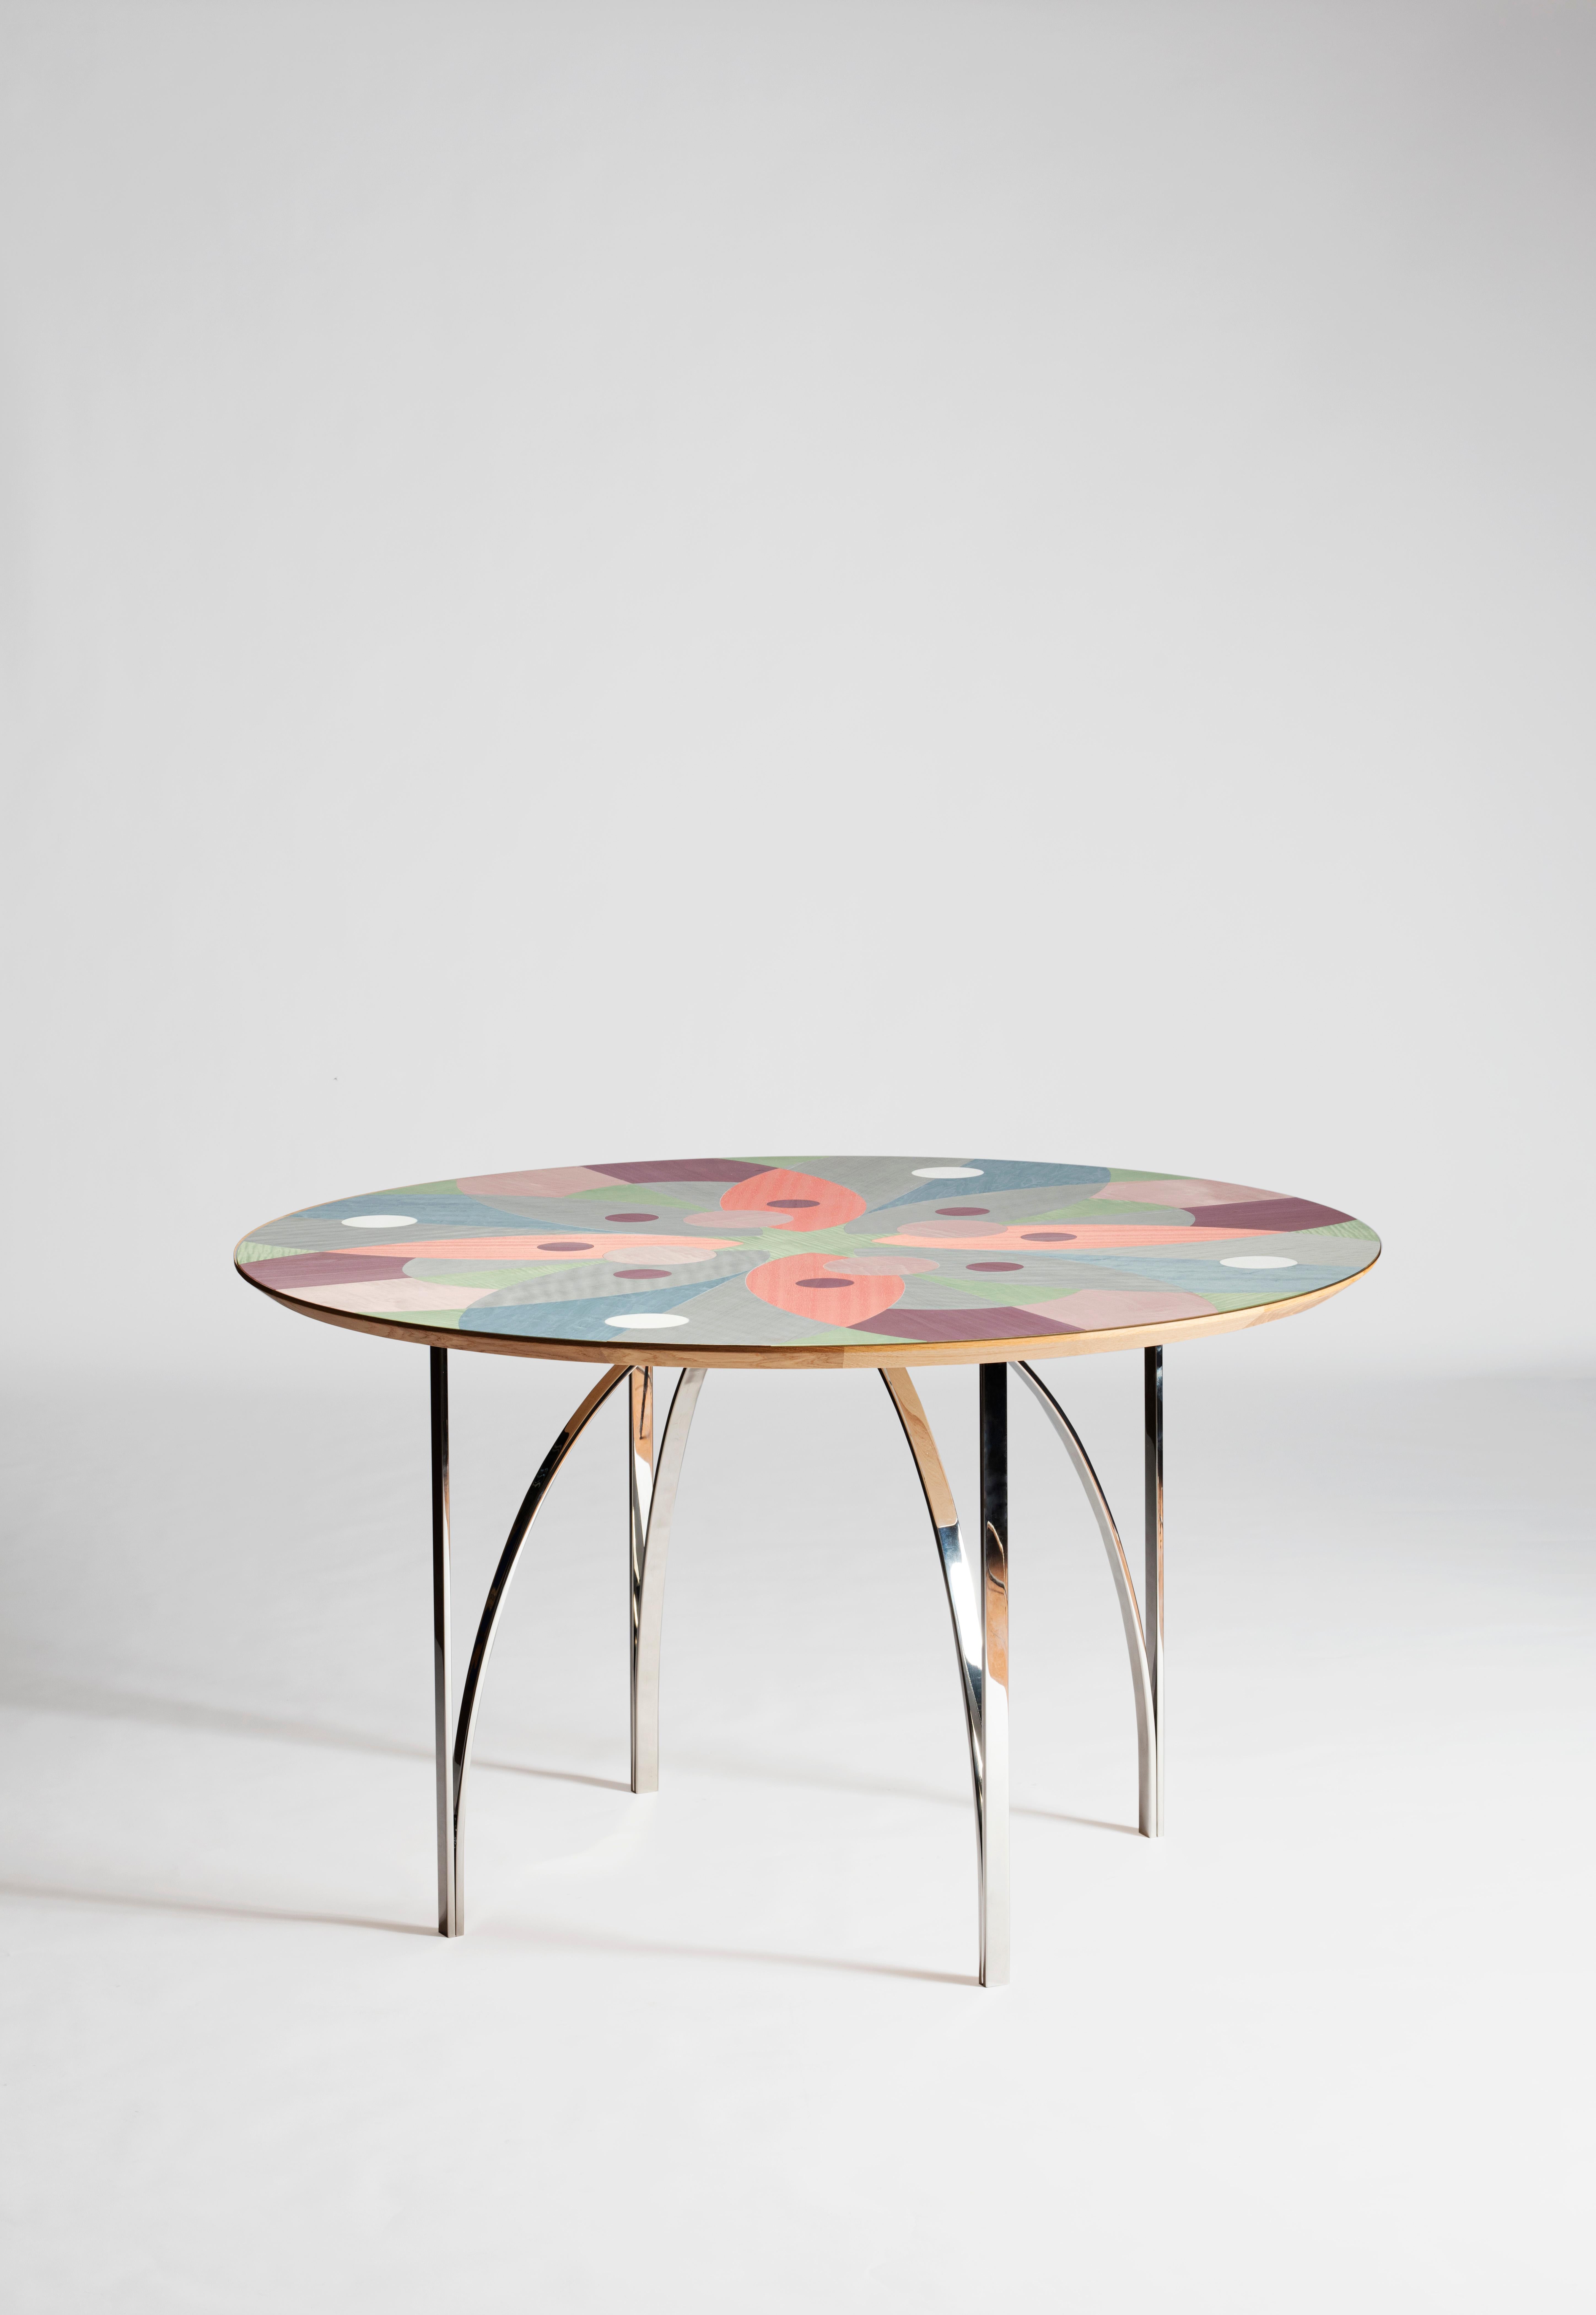 Archie colored table by Serena Confalonieri
Dimensions: D 130 cm x H 75 cm
Materials: solid plywood and veneered, steel or iron.
Available in 4 versions :colored veneers, canaletto walnut veneer, european walnut and oak veneer. Legs in mirror